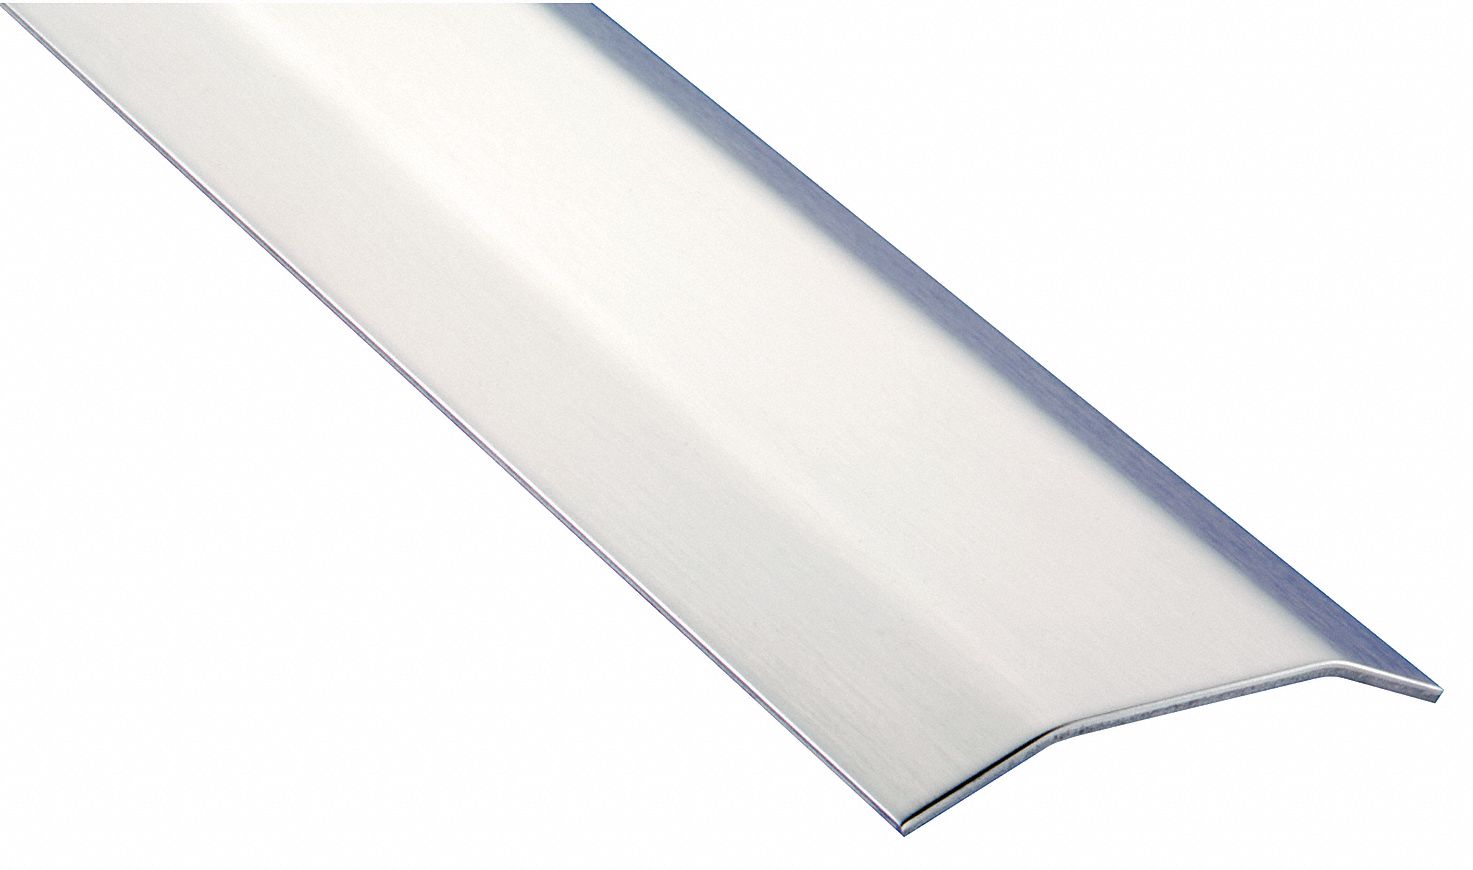 PEMKO 175SS72 6 ft x 4 in x 1/2 in Smooth Top Saddle Threshold, Silver